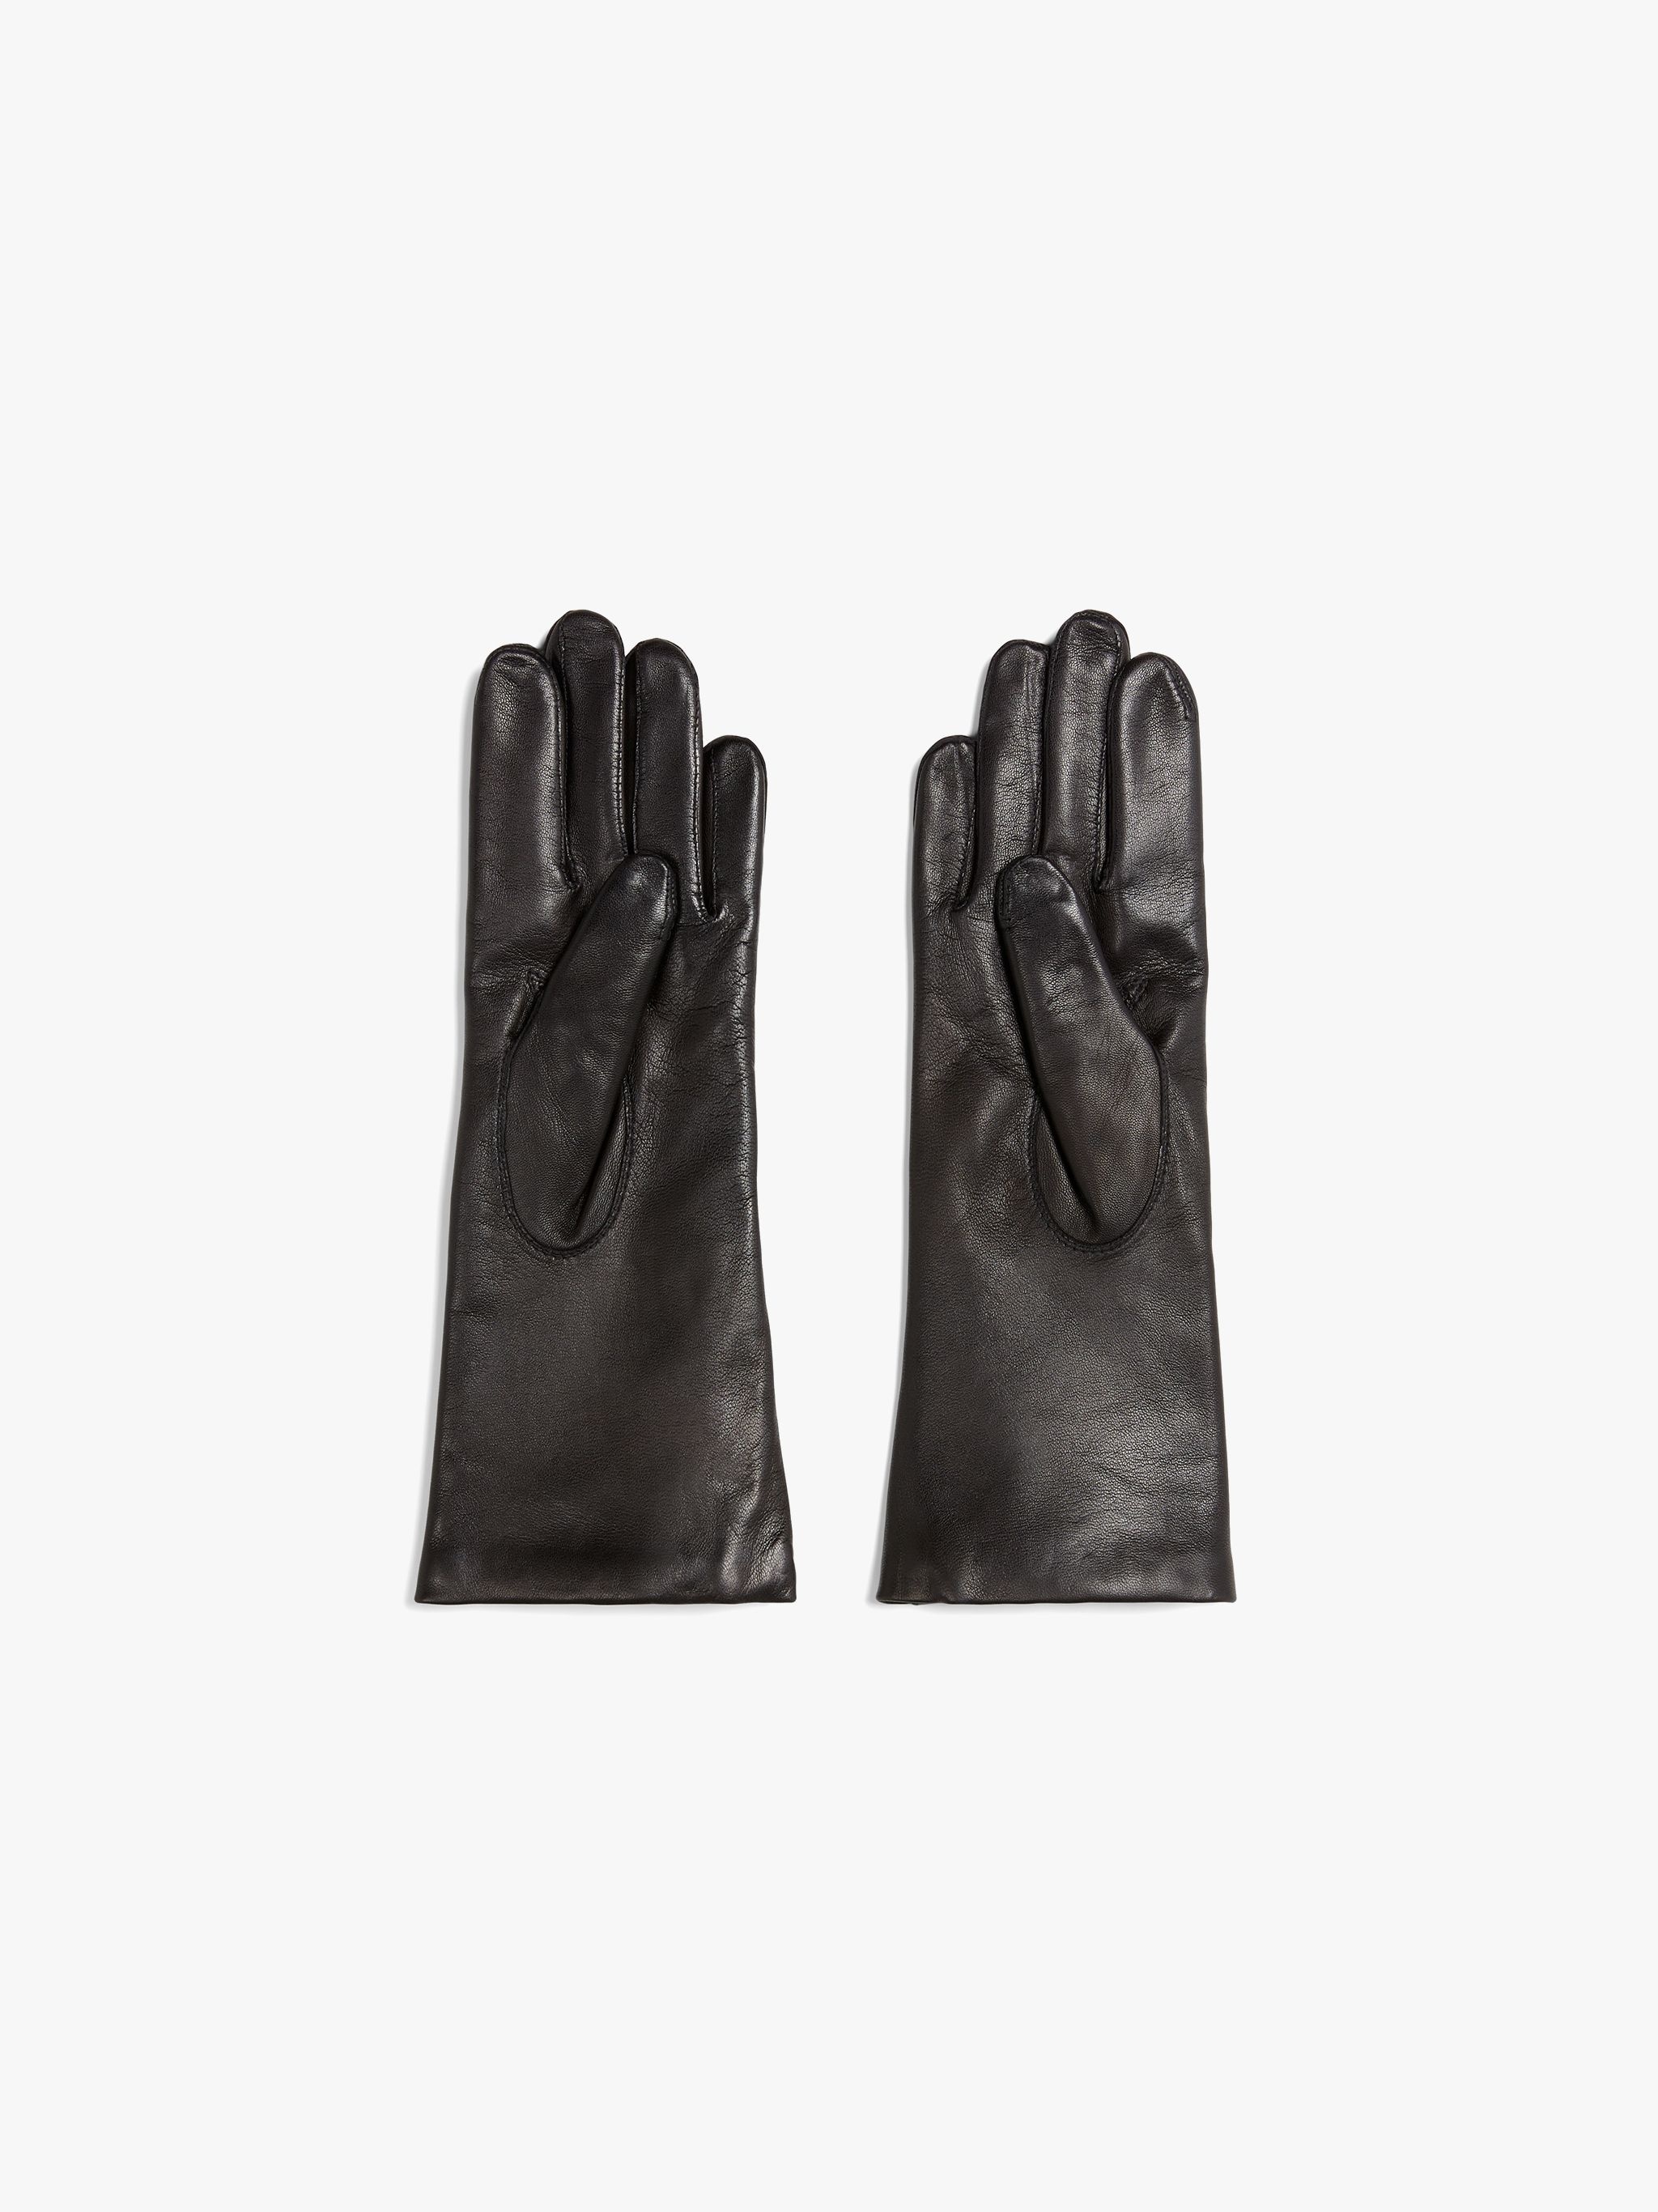 BLACK HAIRSHEEP LEATHER CASHMERE LINED GLOVES - 3